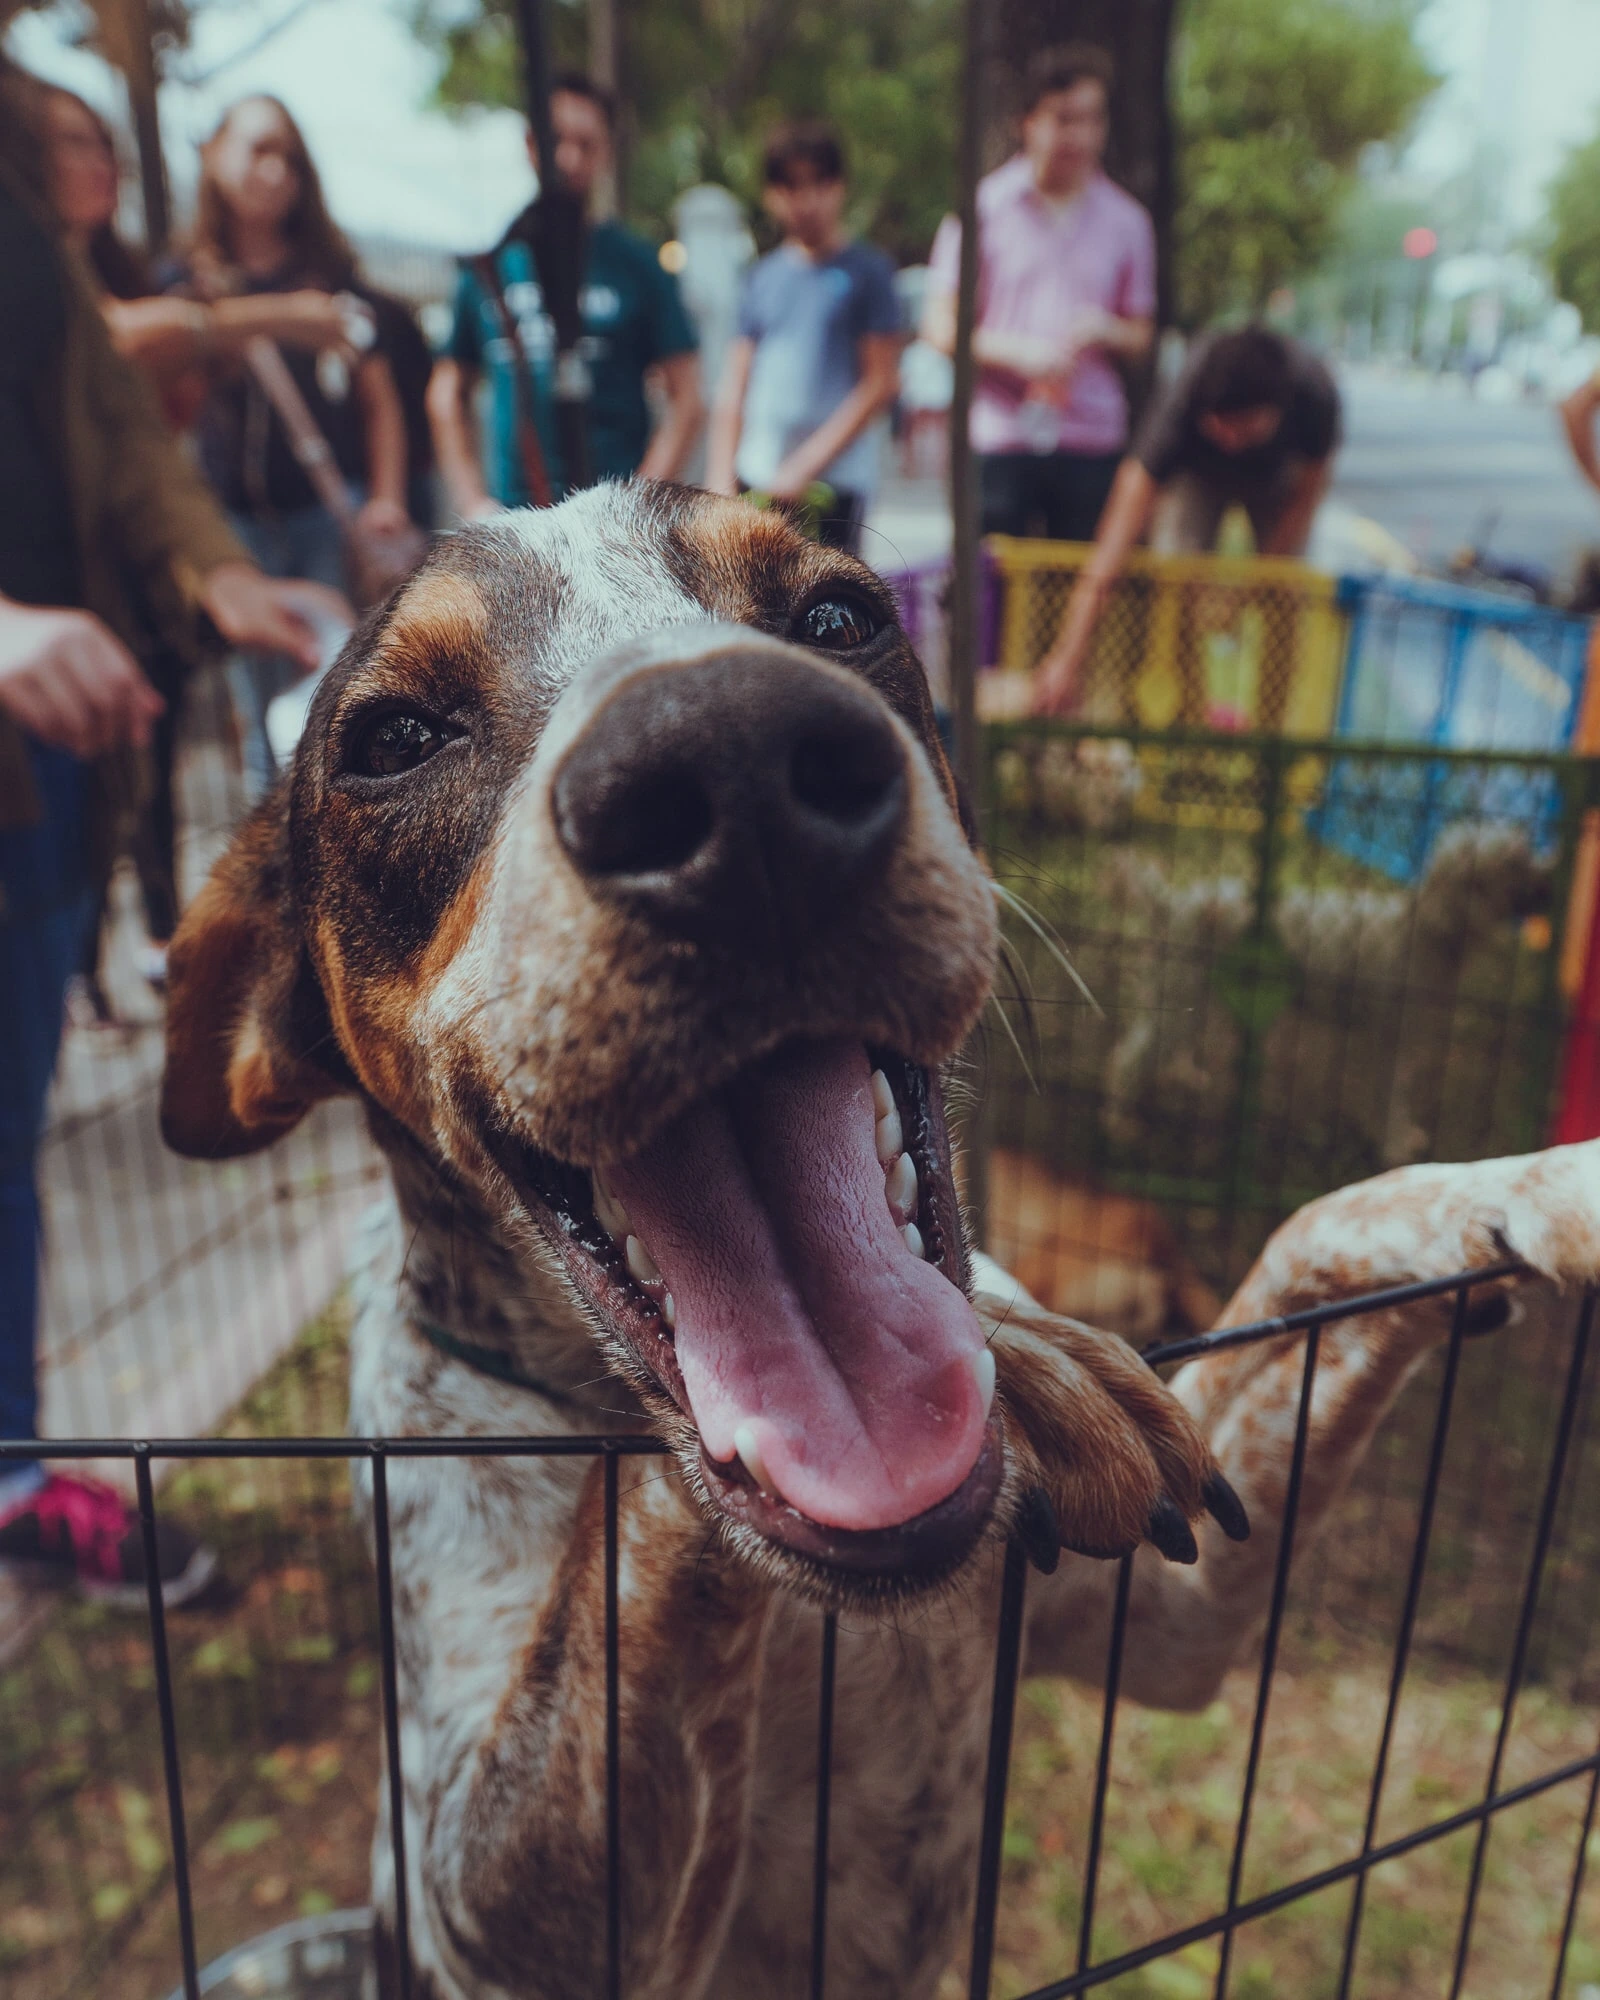 alonso-romero-beautiful hound dog sitting up in grocery cart with mouth open in joy-unsplash